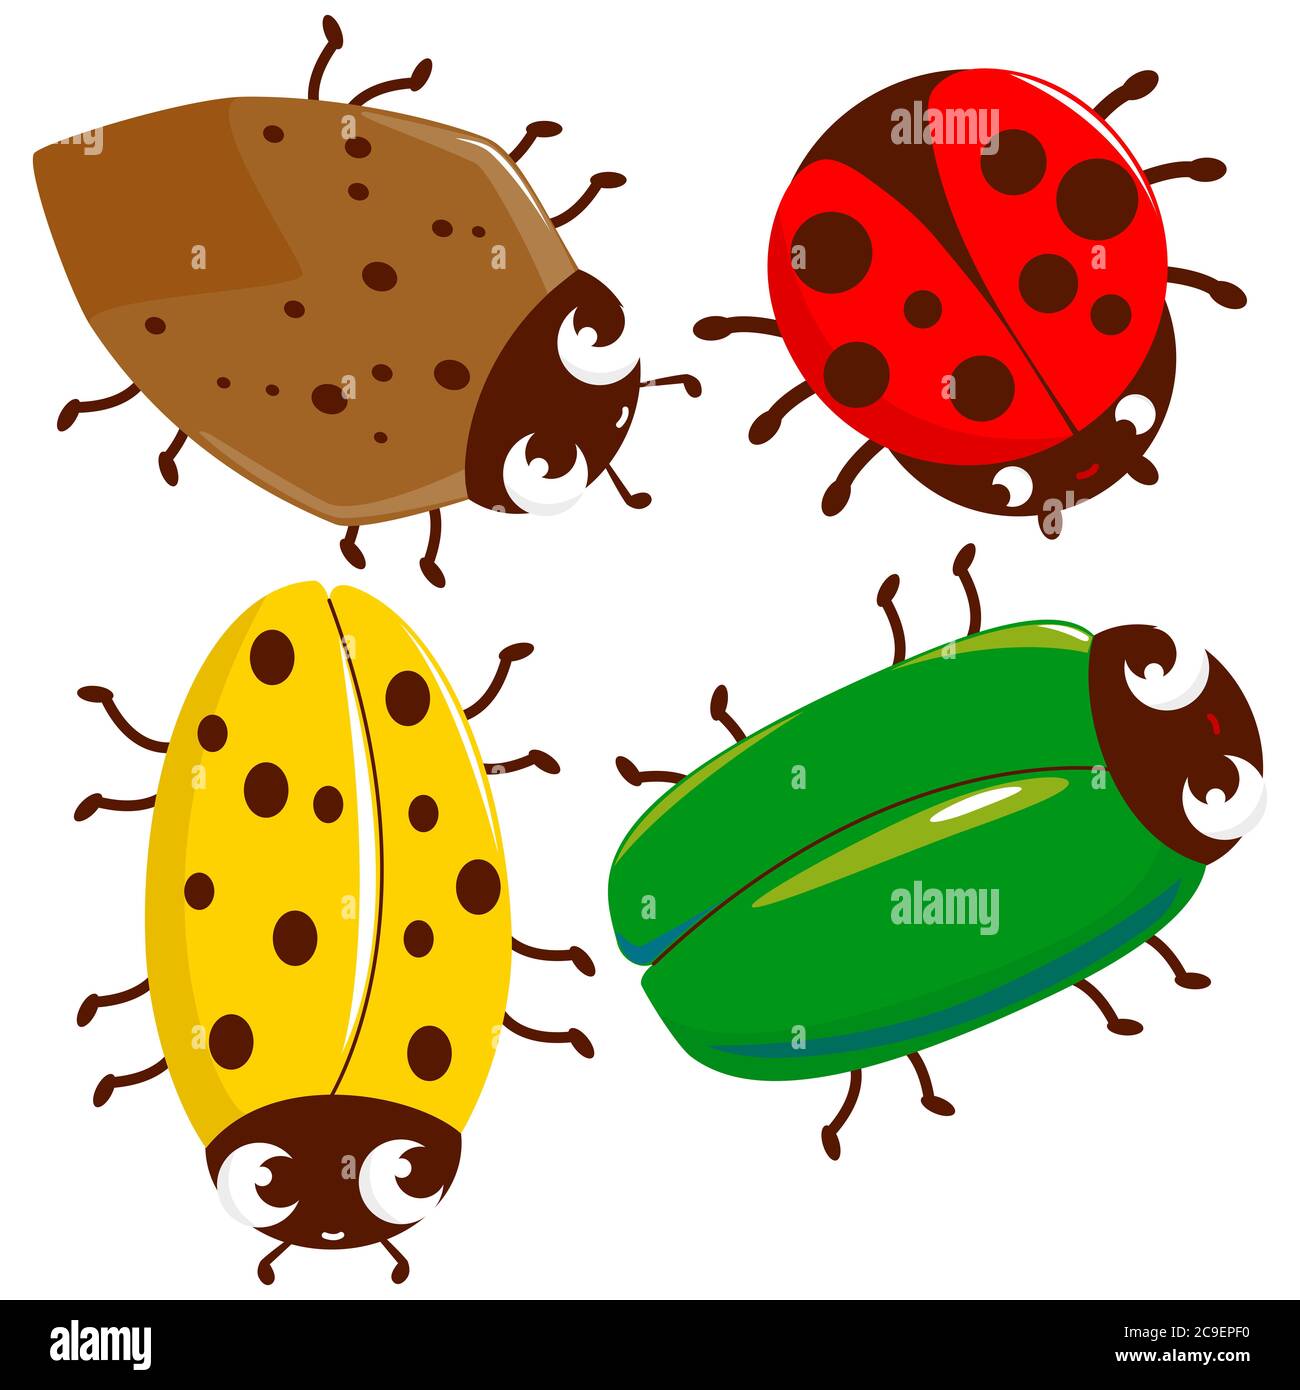 Cartoon bugs collection on white background. Stock Photo